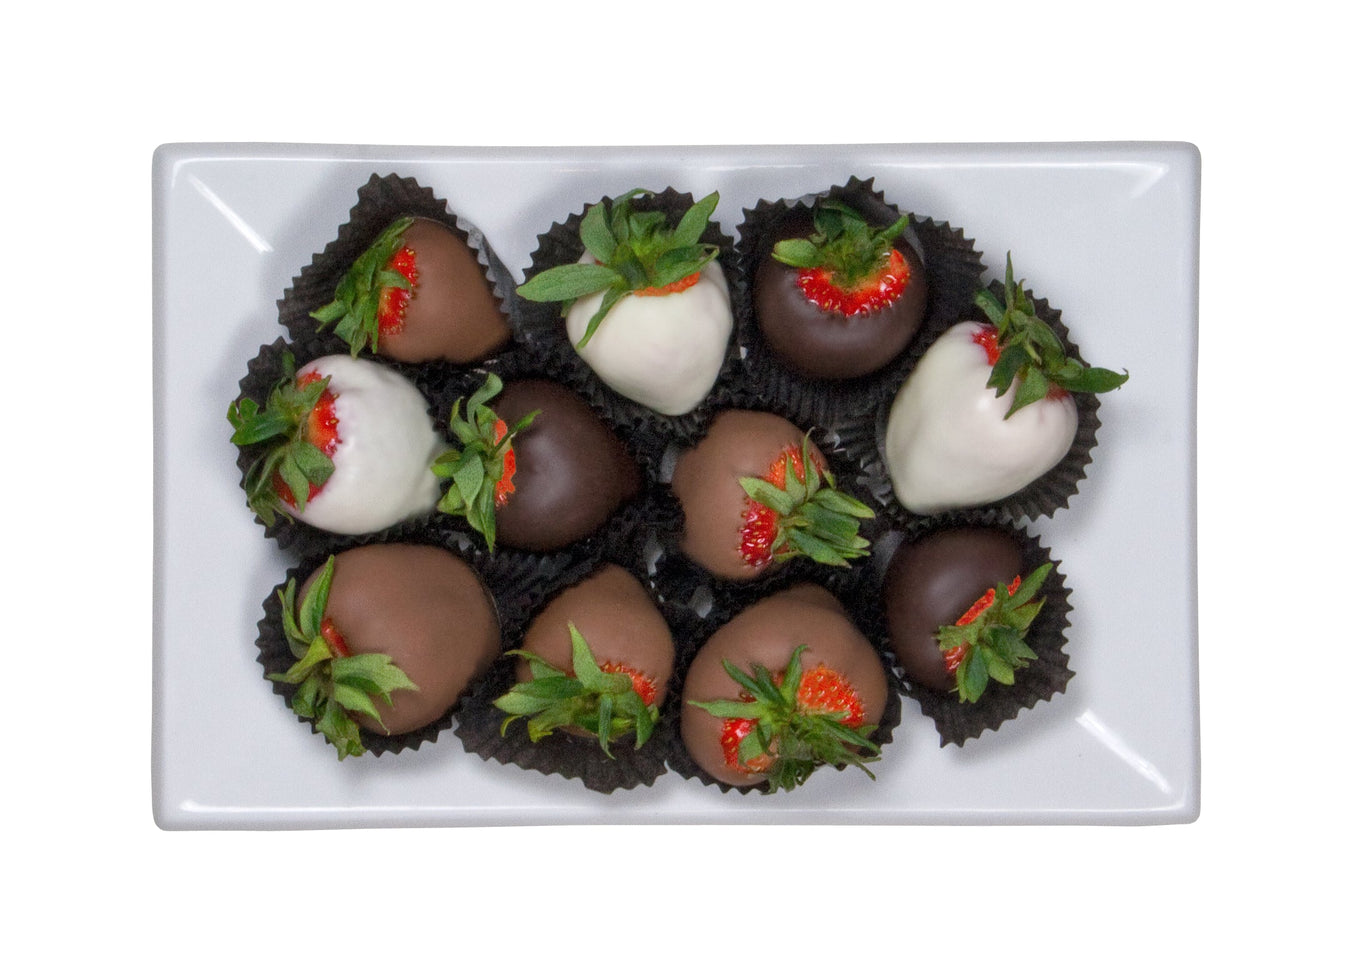 Delicious chocolate-covered strawberries